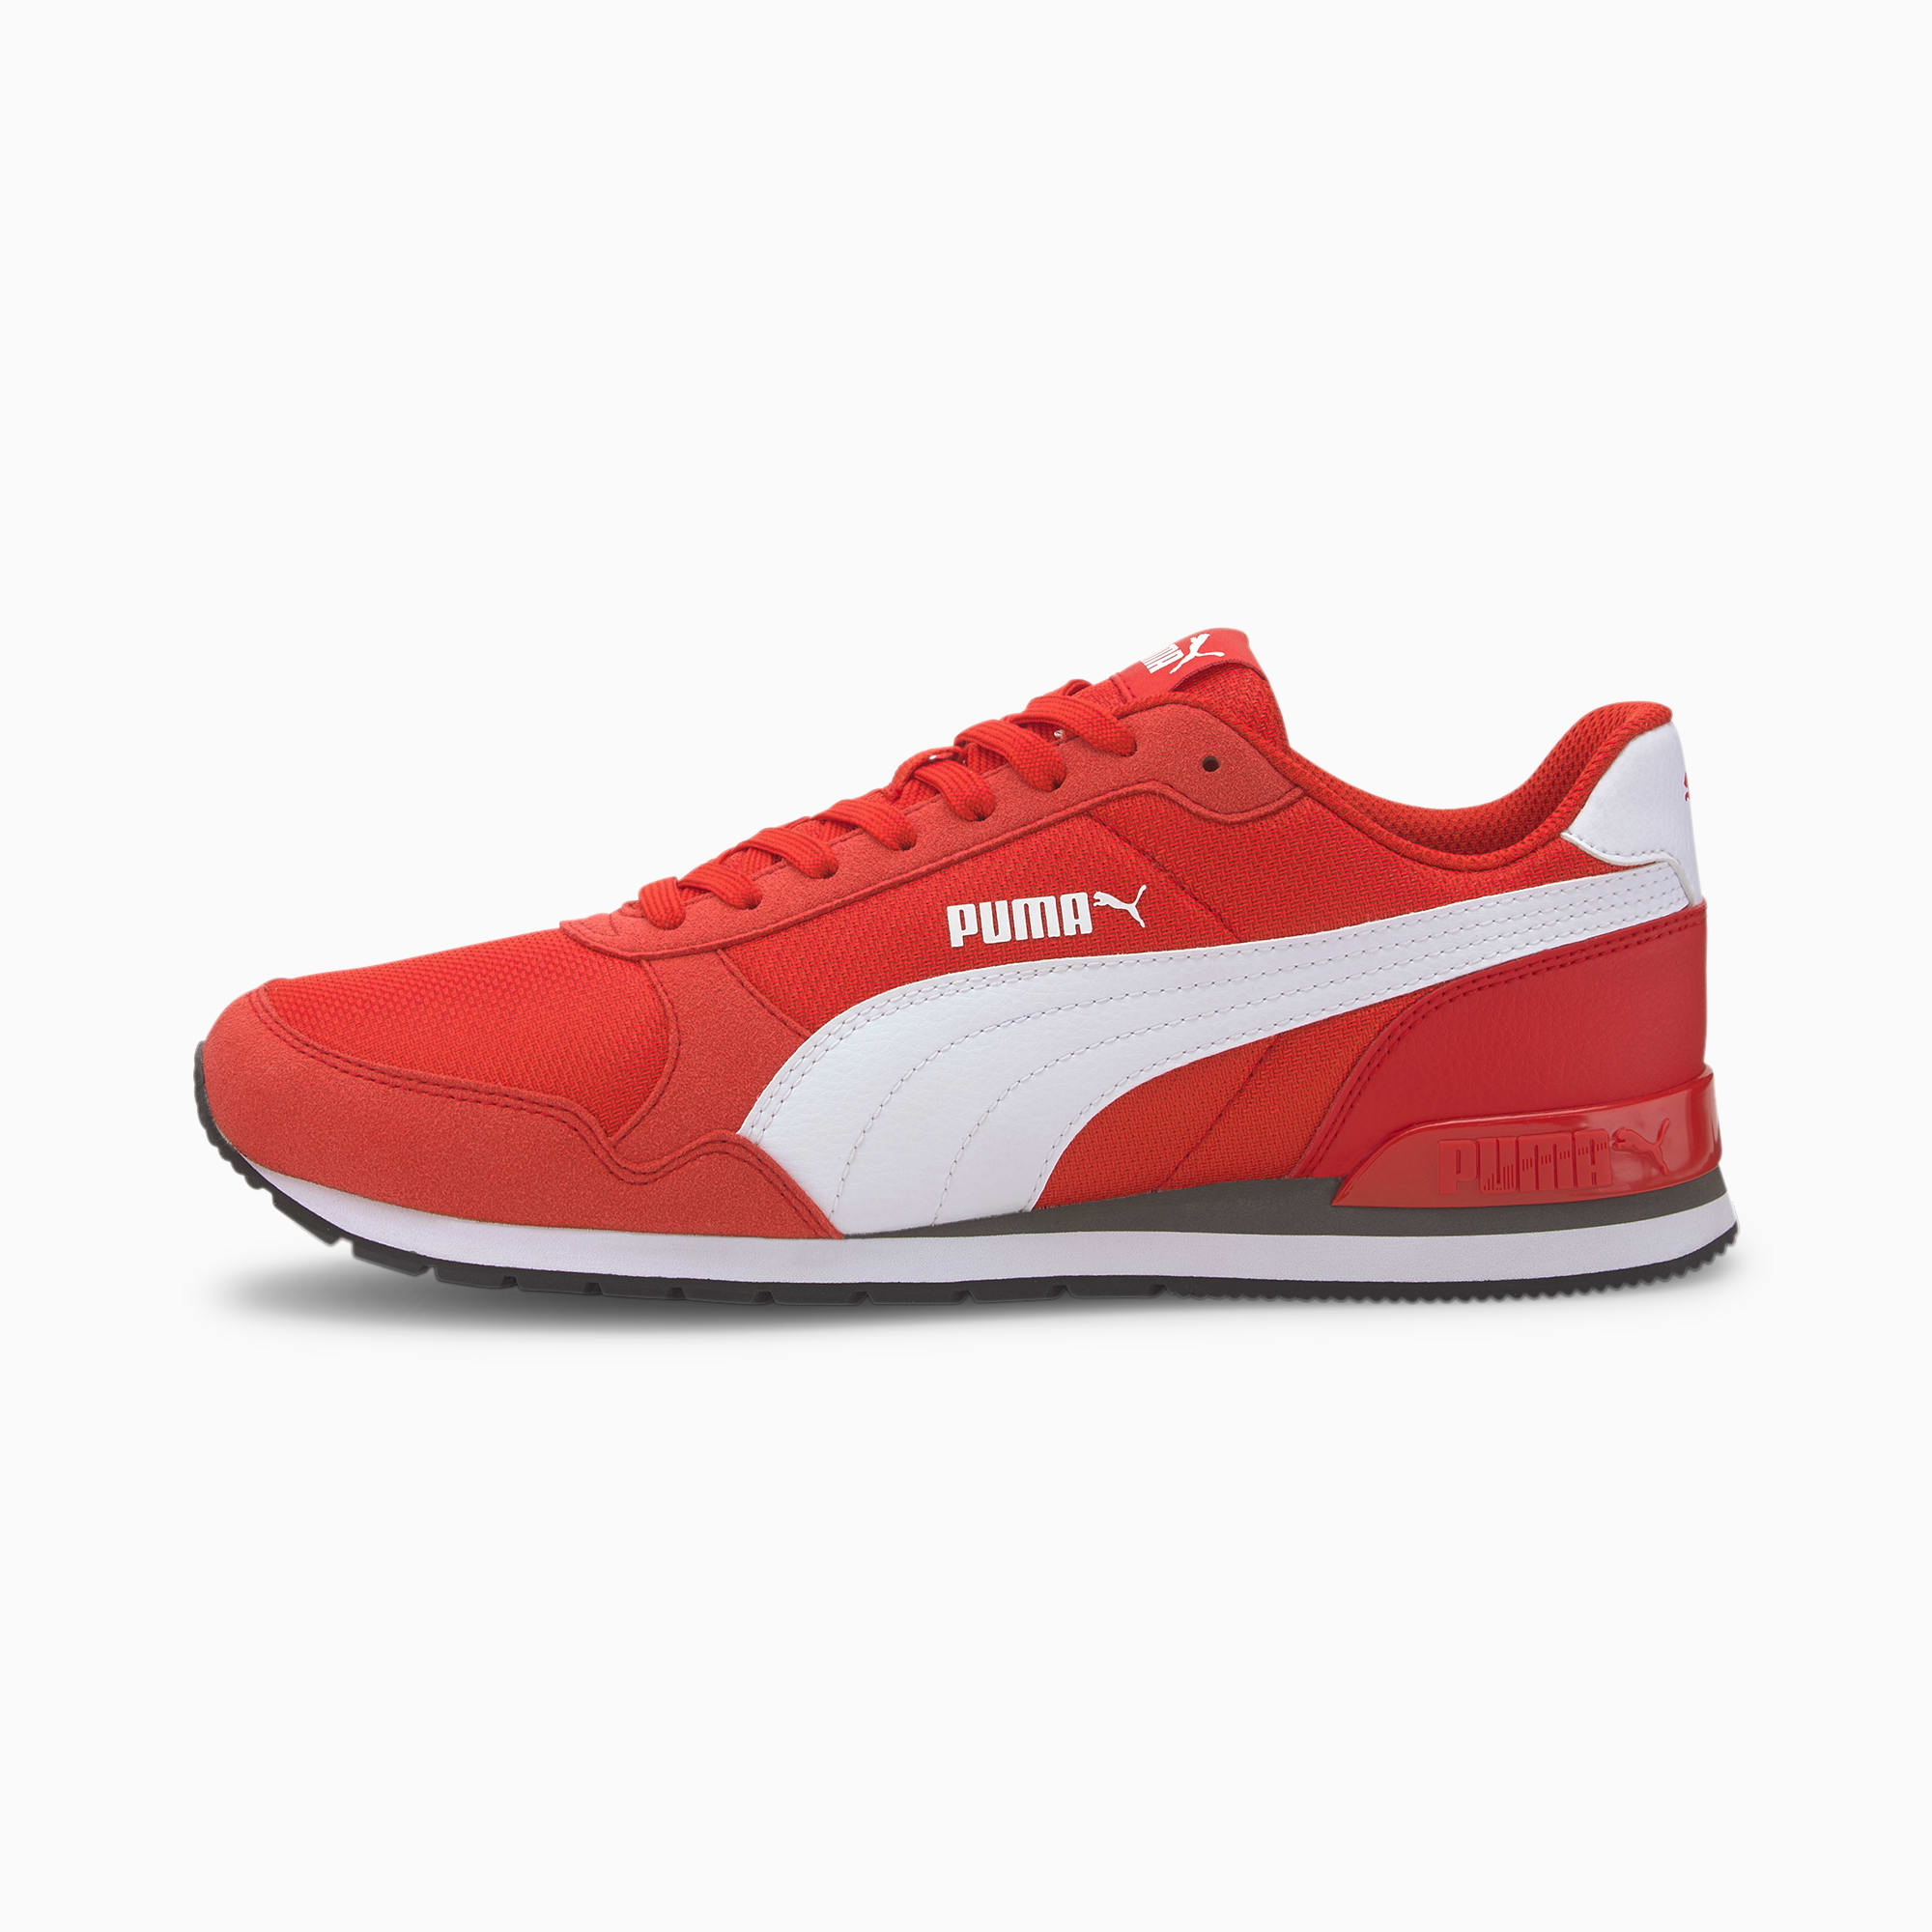 puma unisex st runner v2,Save up to 18%,www.ilcascinone.com